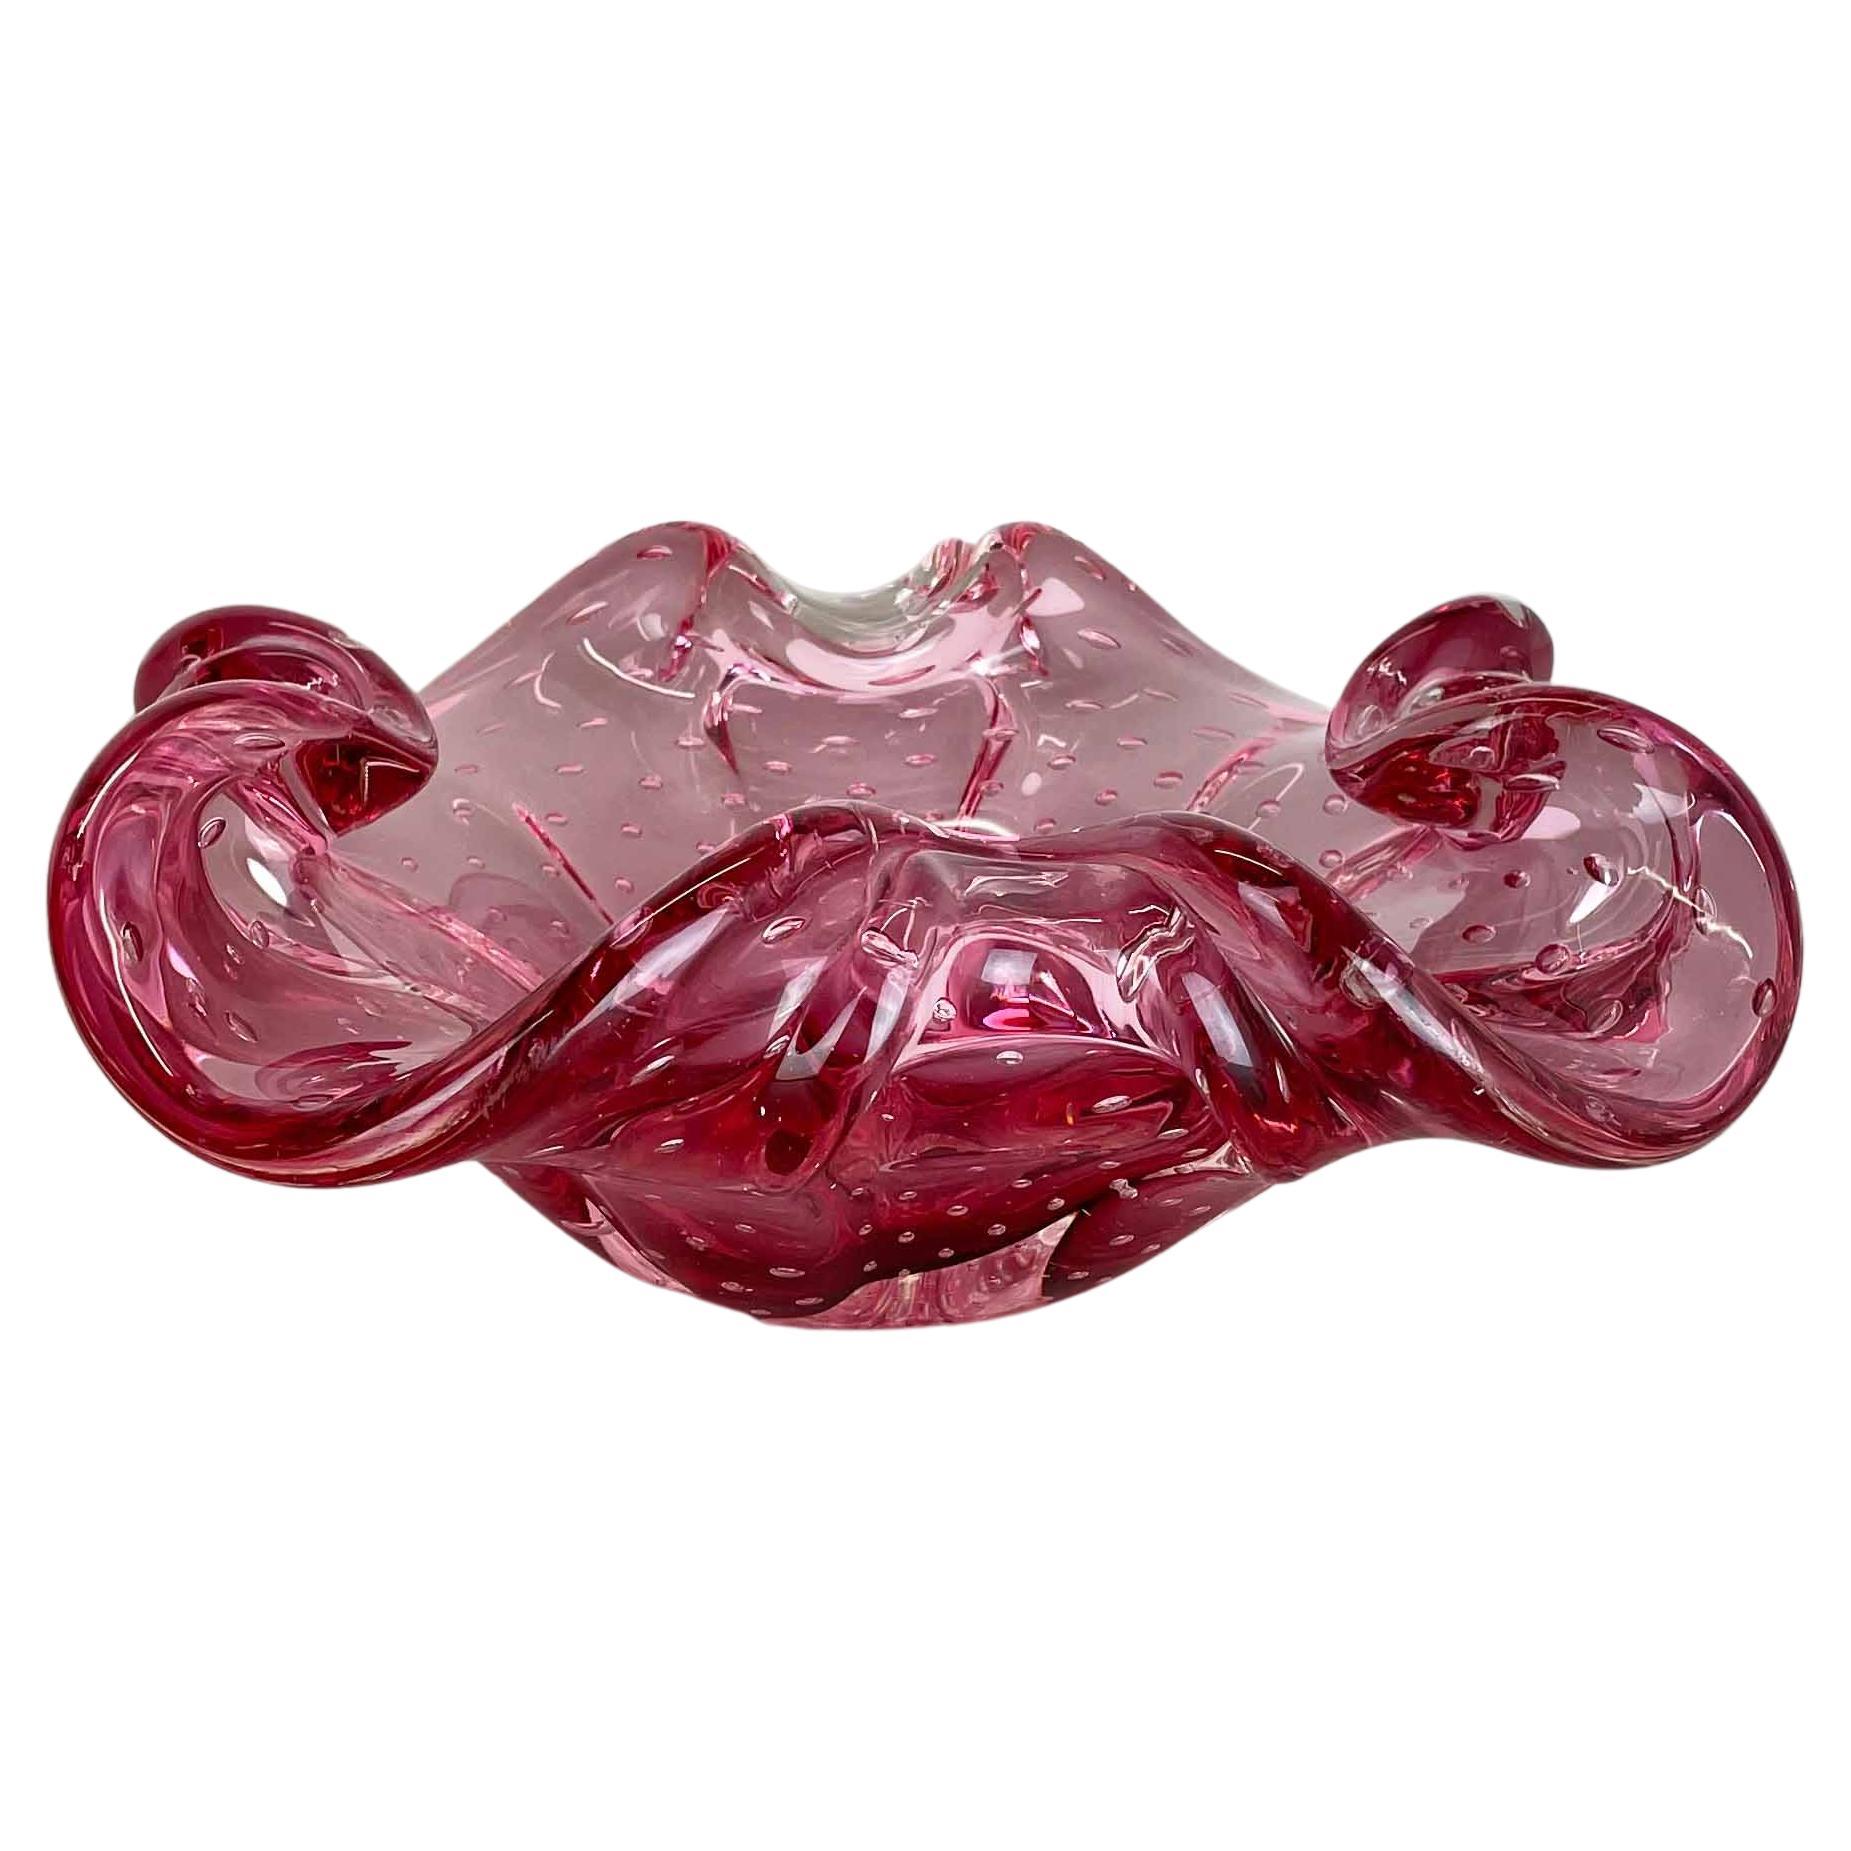 Heavy 3.7kg Rare Extra Large Shell Bowl "PINK BUBBLE" Murano Glass, Italy, 1970 For Sale